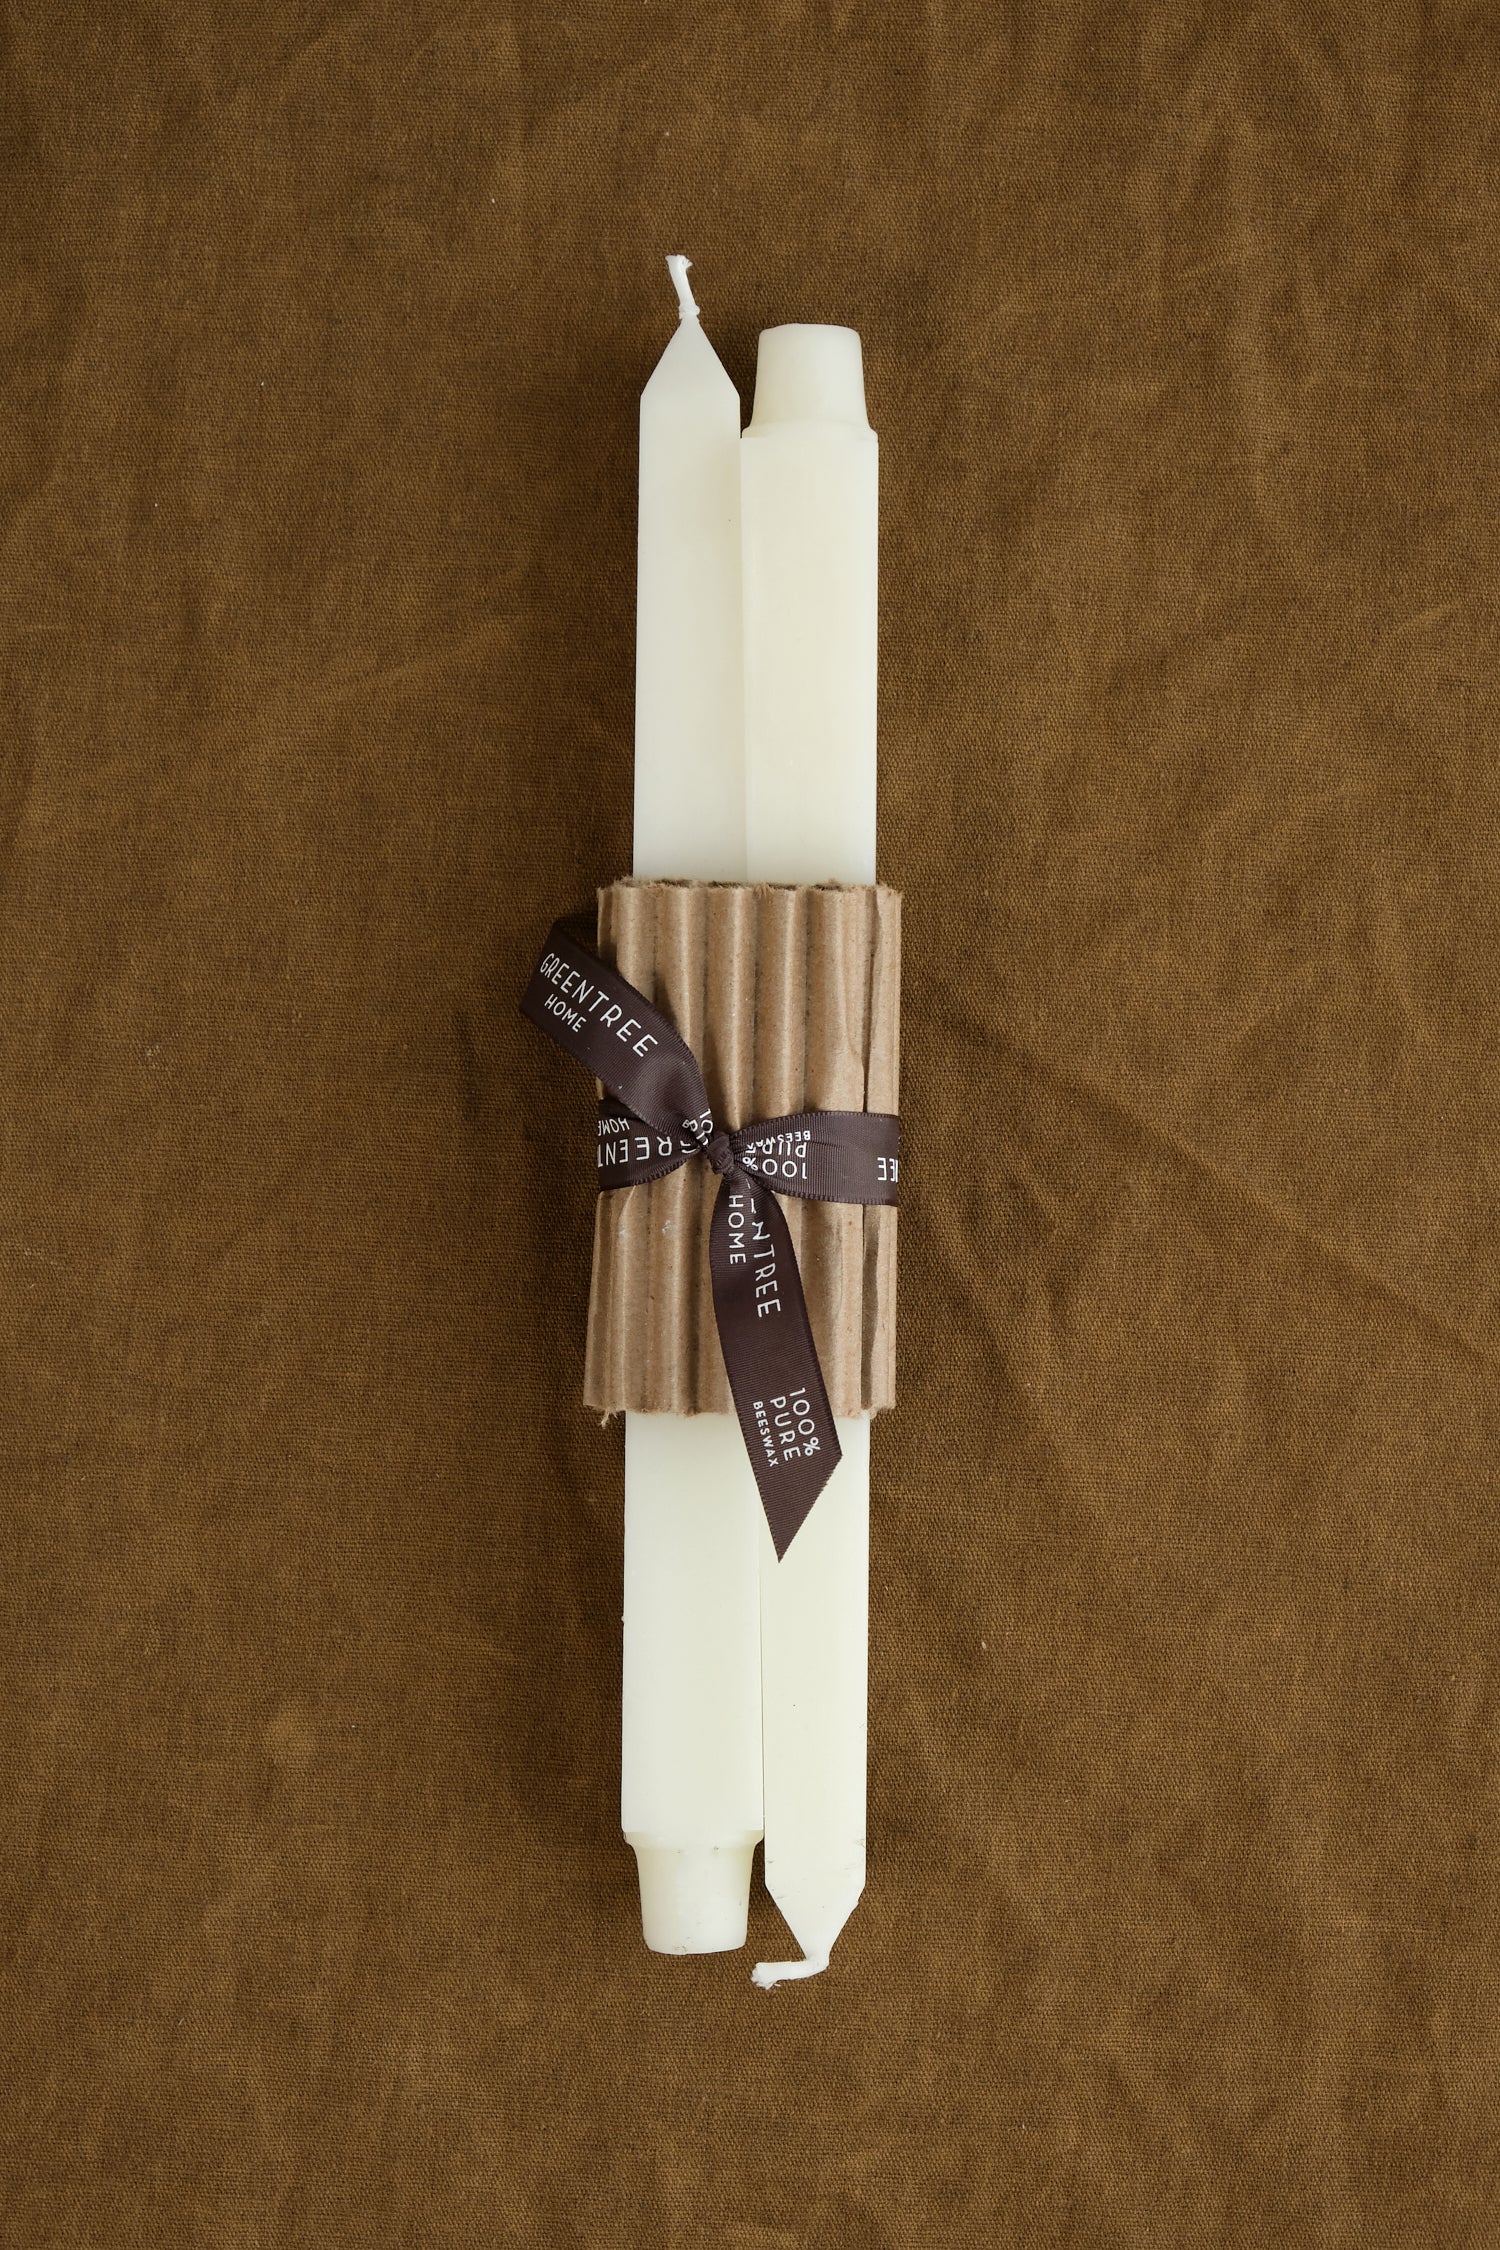 Cream Square Tapers Candle